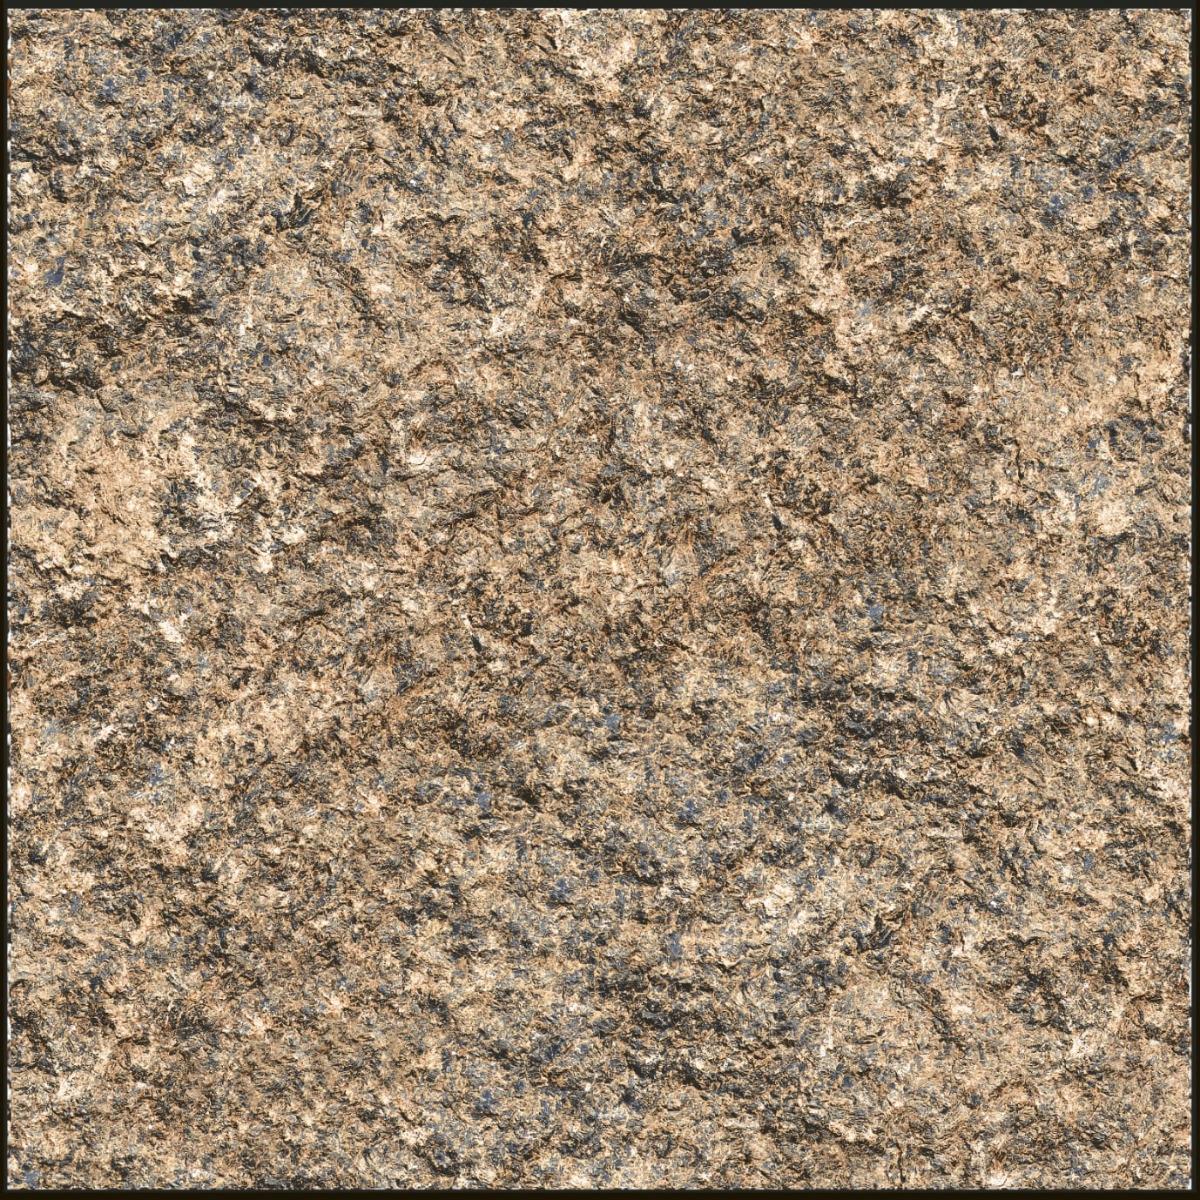 Buy TL Rough Stone Brown Wall and Floor Tiles Online | Orientbell Tiles